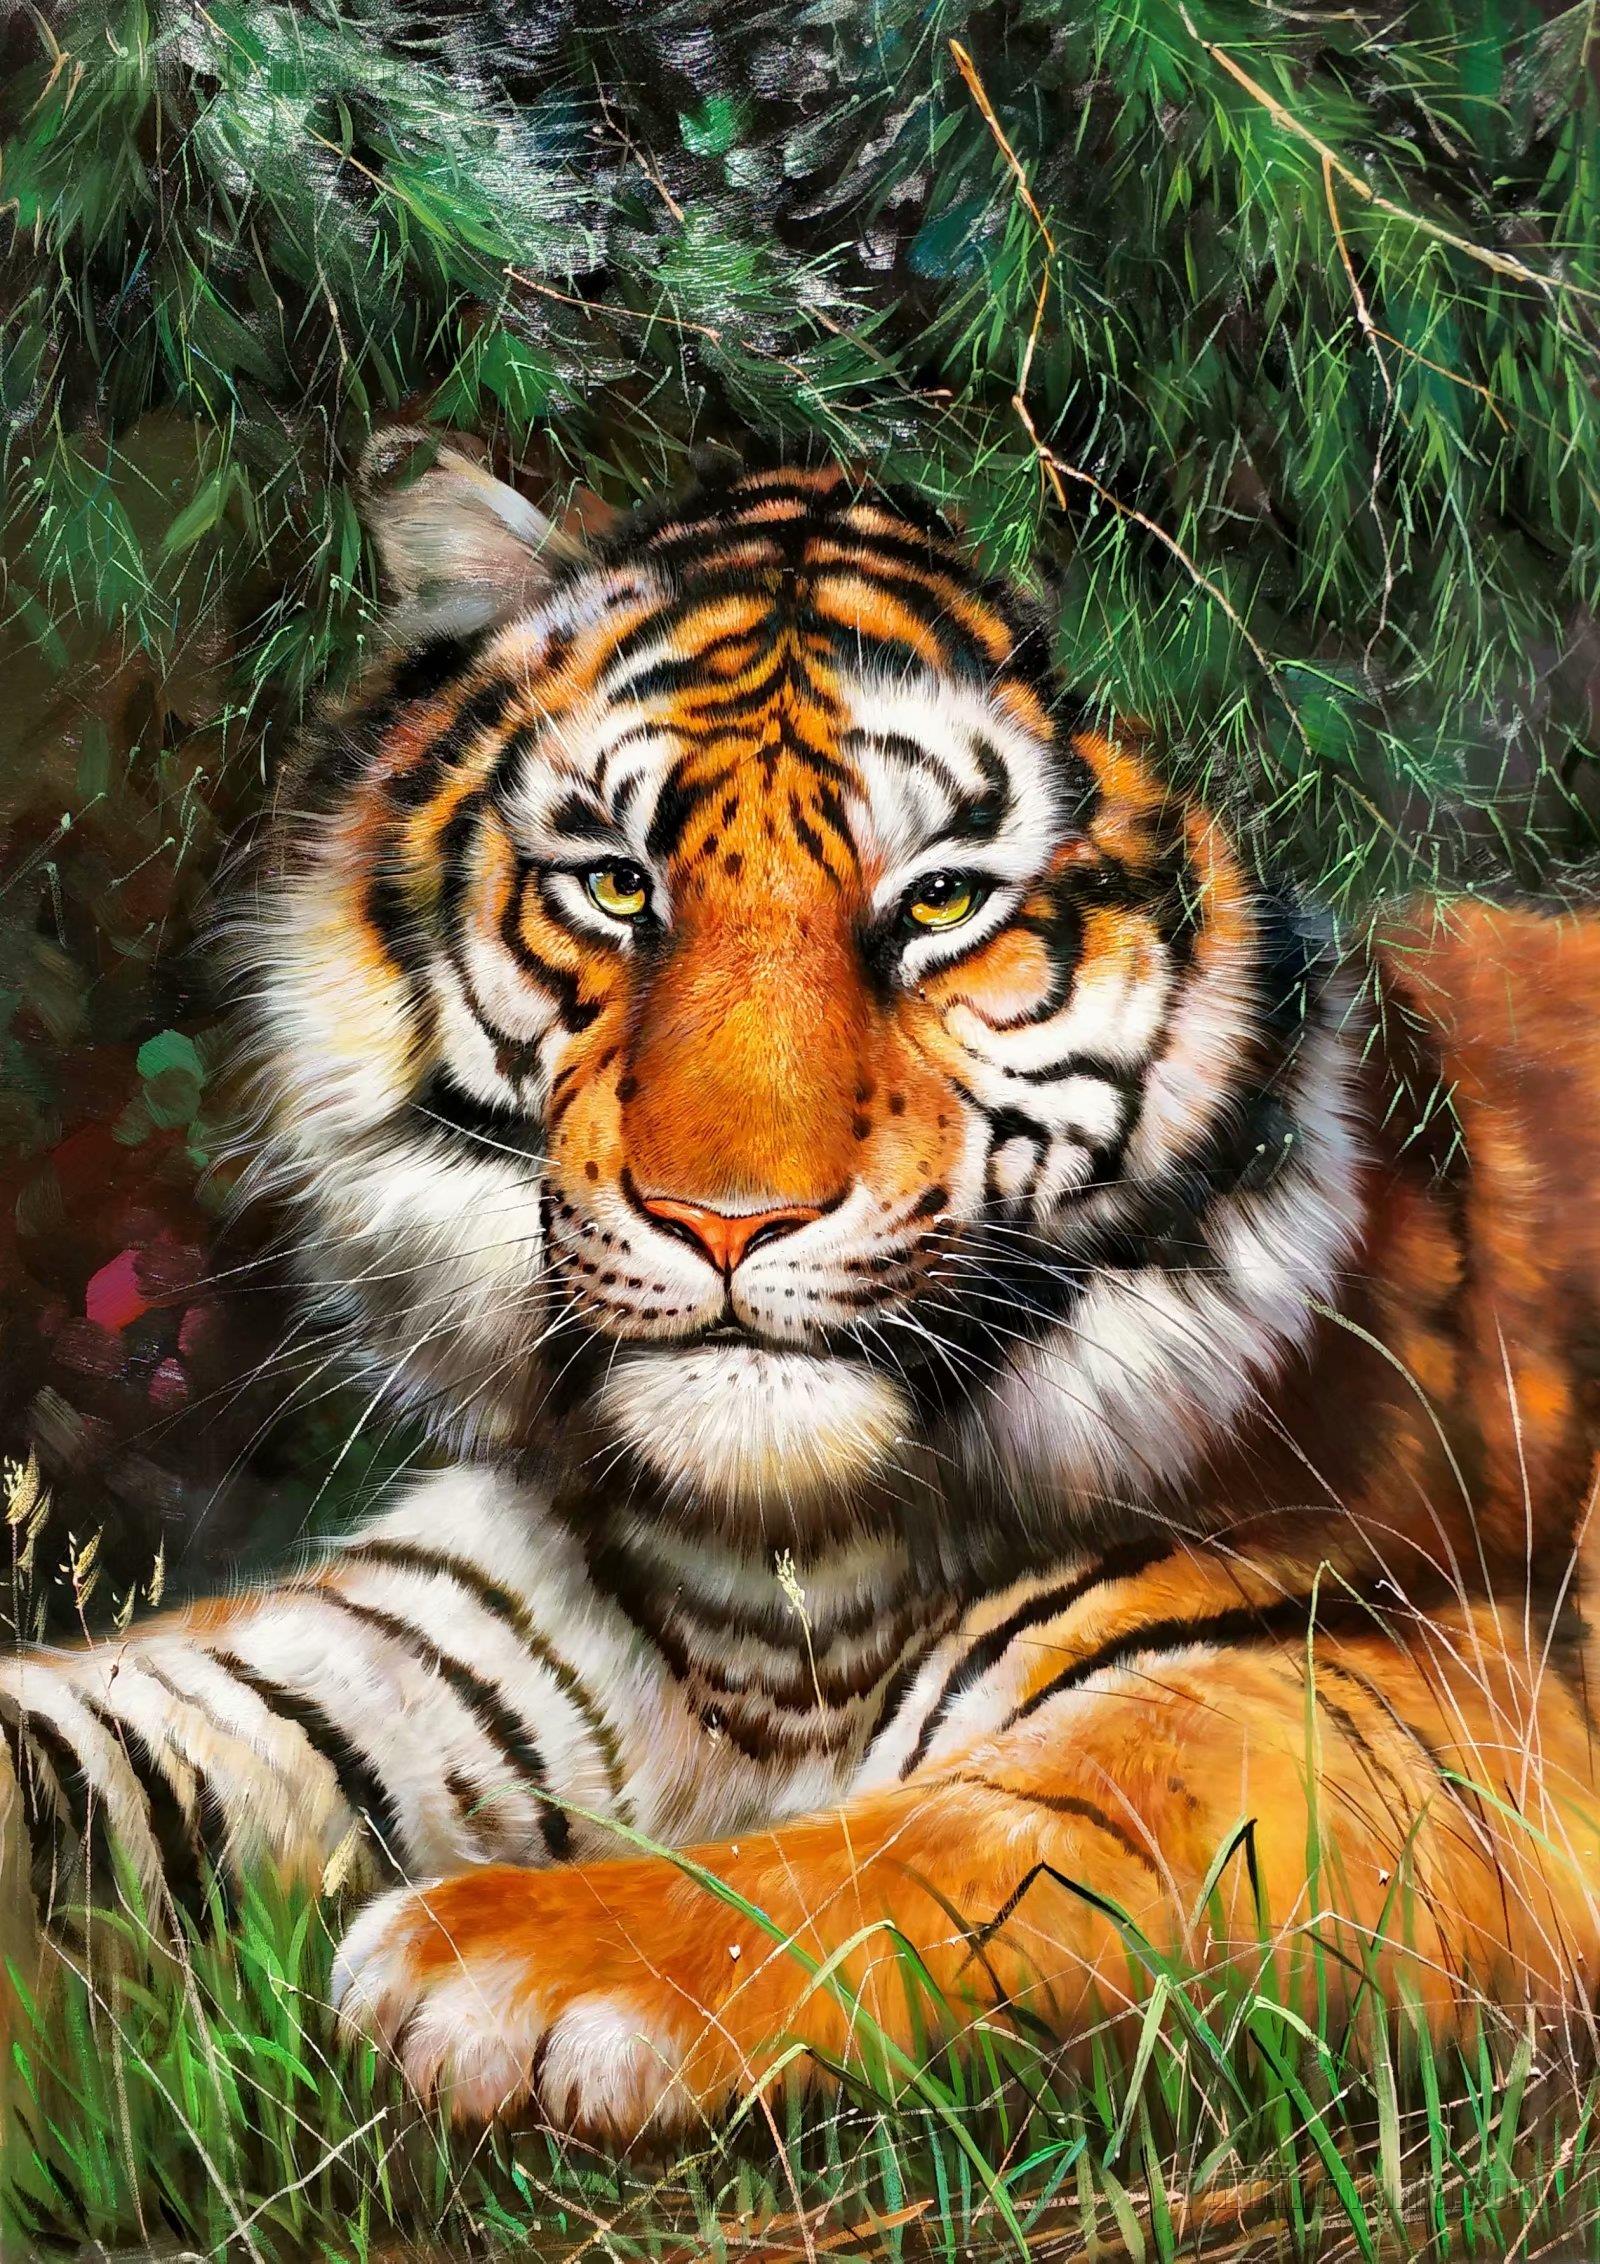 The Lying Tiger